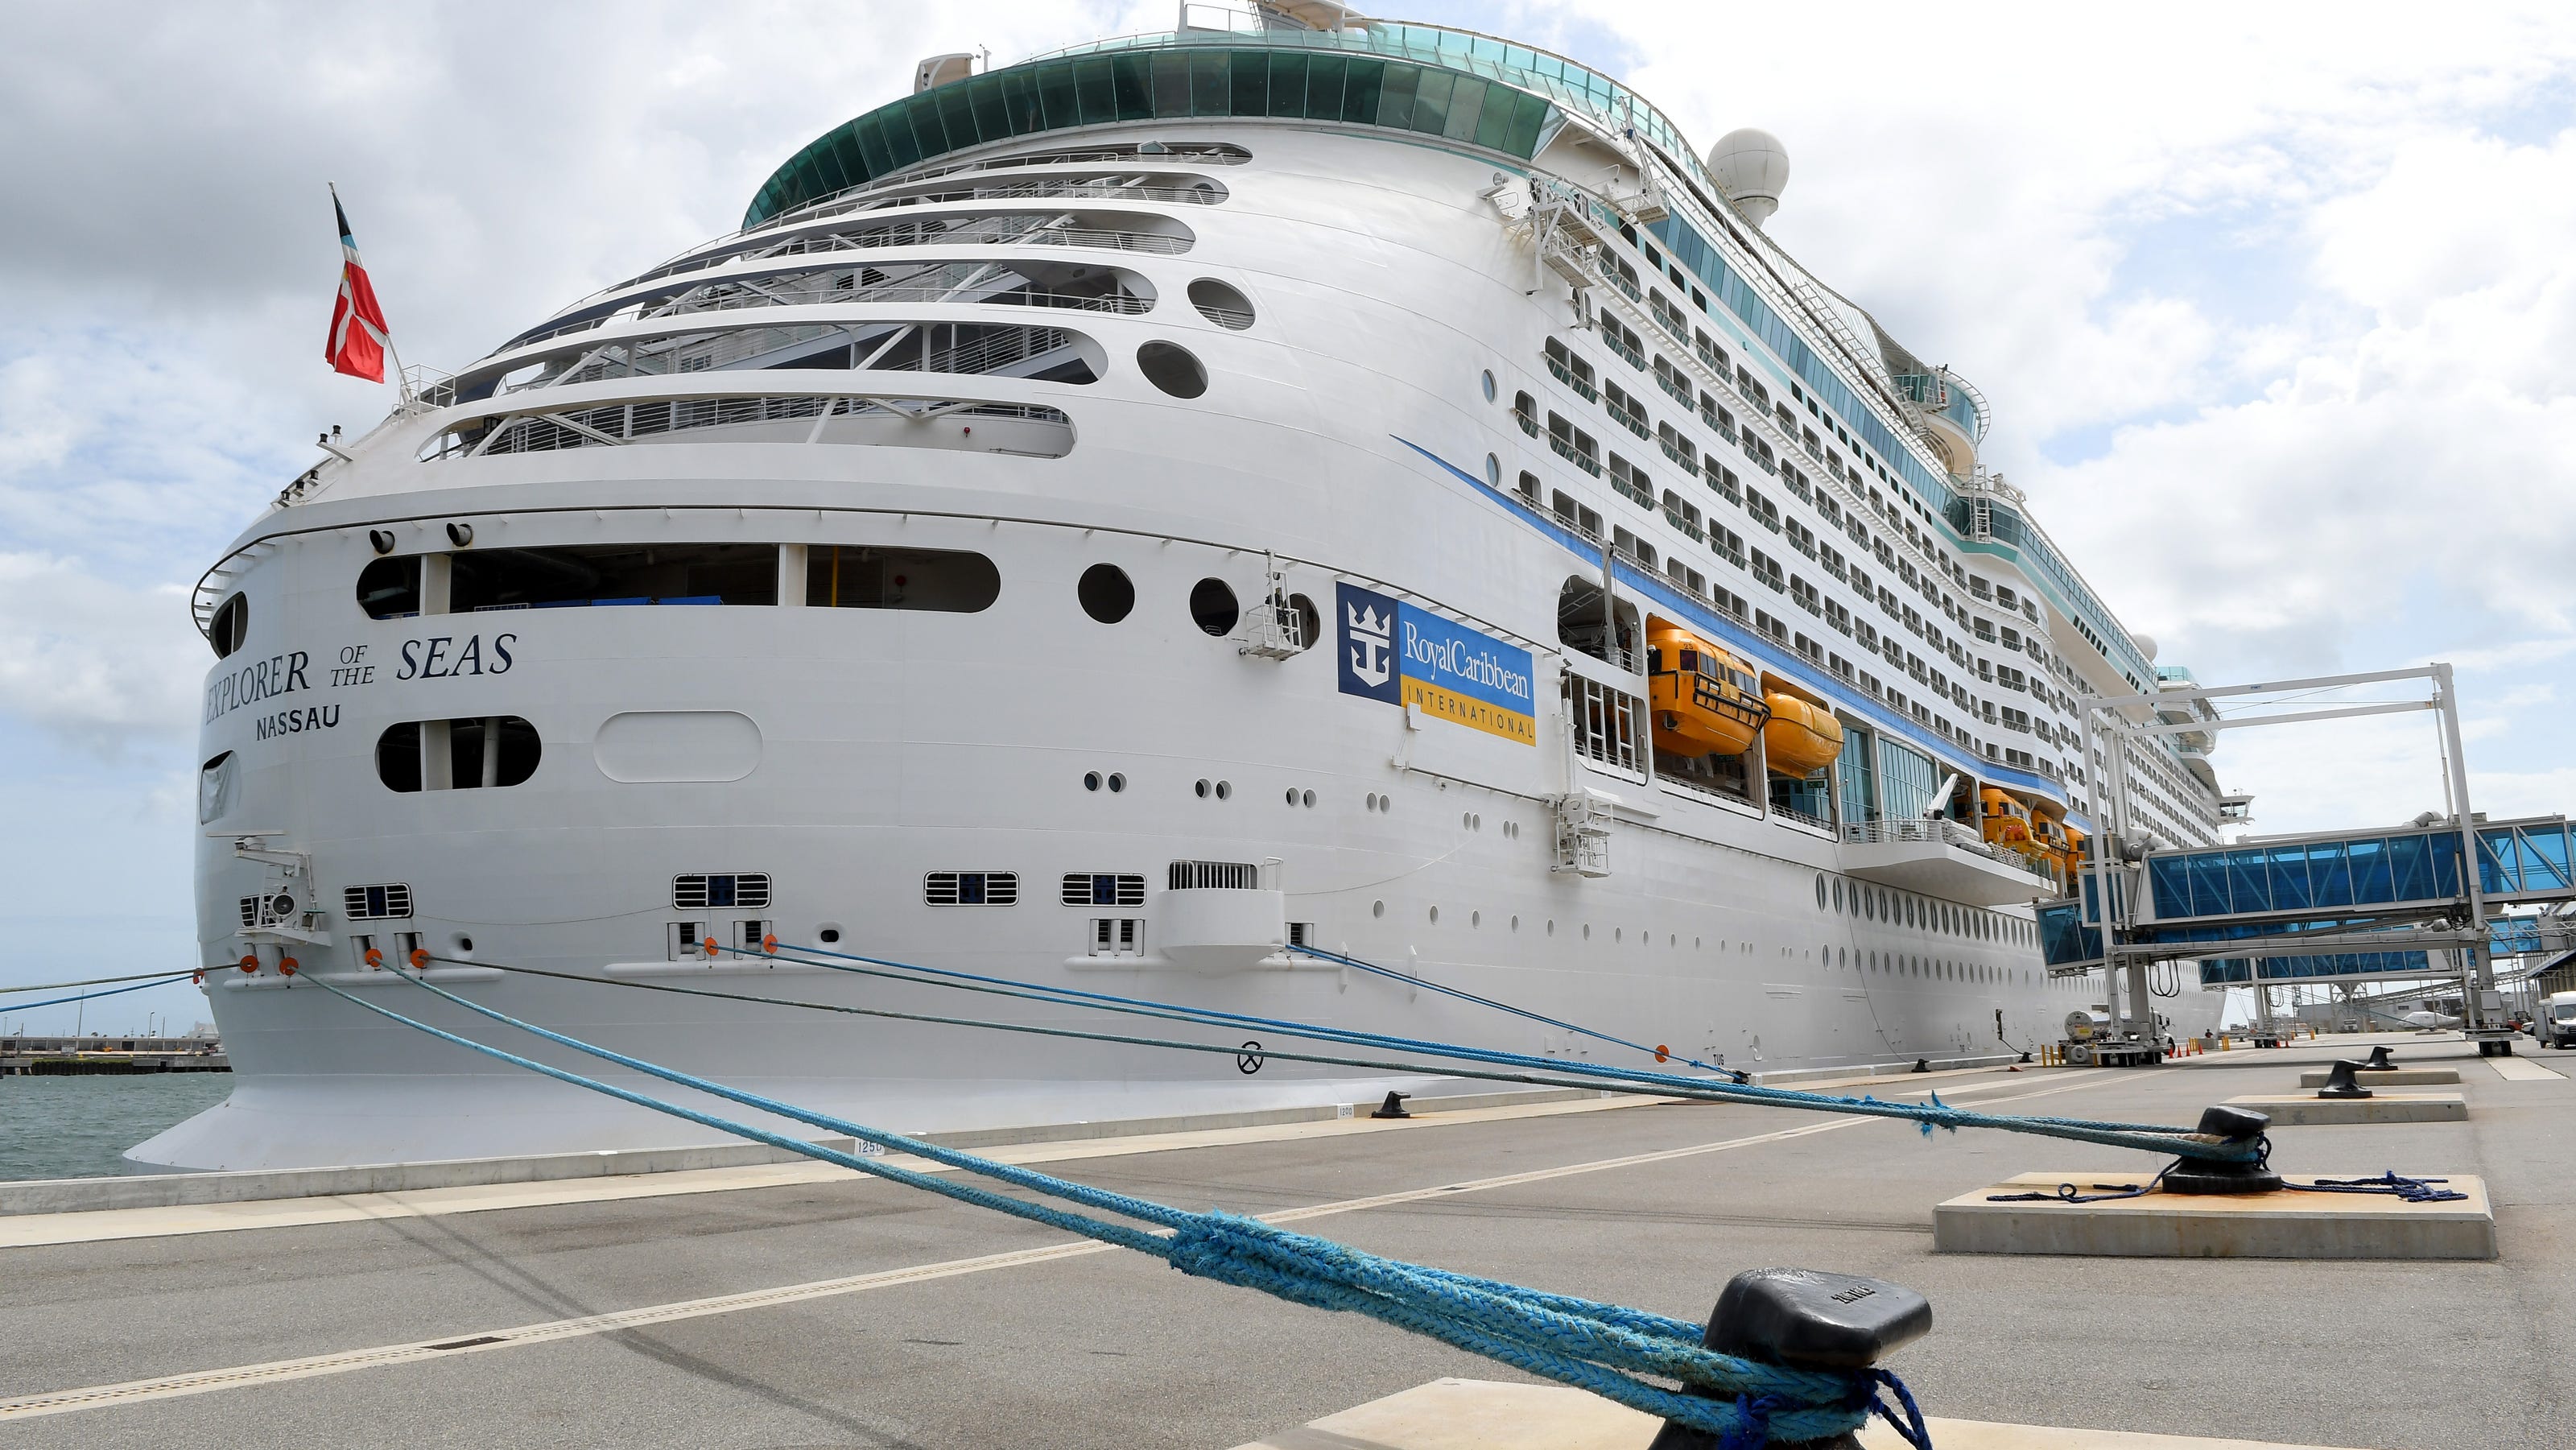 Return to cruising: Royal Caribbean readies 2 ships from Port Canaveral